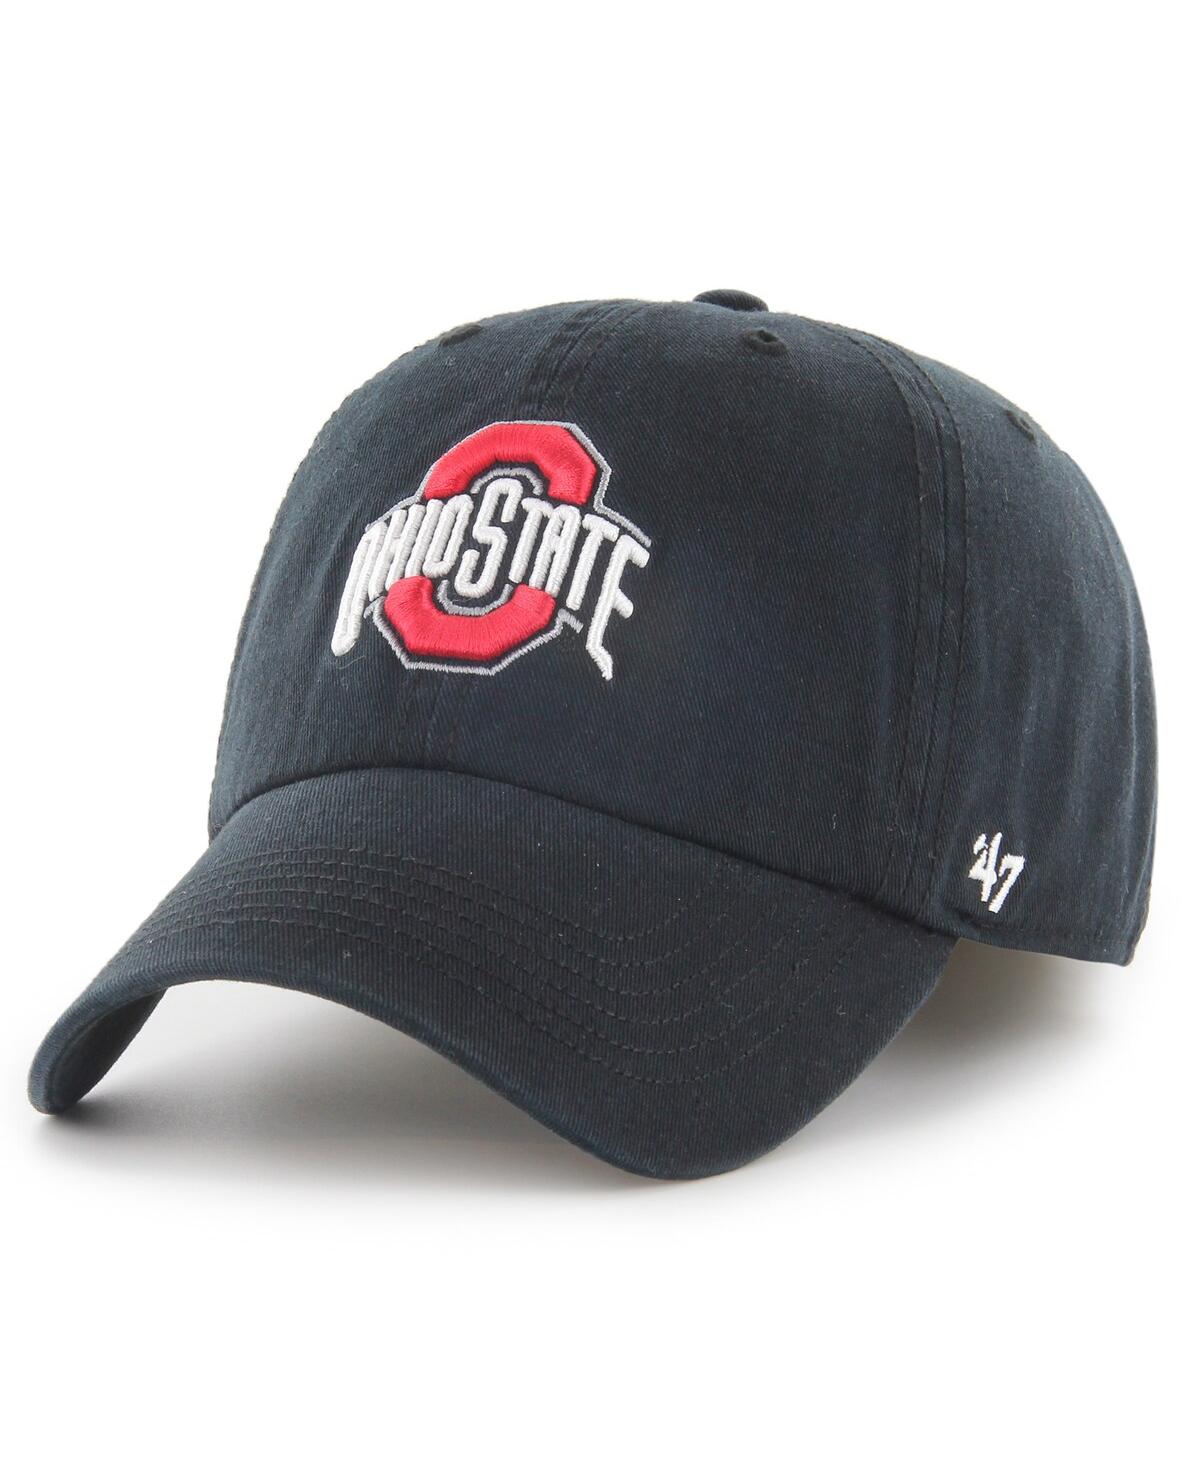 47 BRAND MEN'S '47 BRAND BLACK OHIO STATE BUCKEYES FRANCHISE FITTED HAT